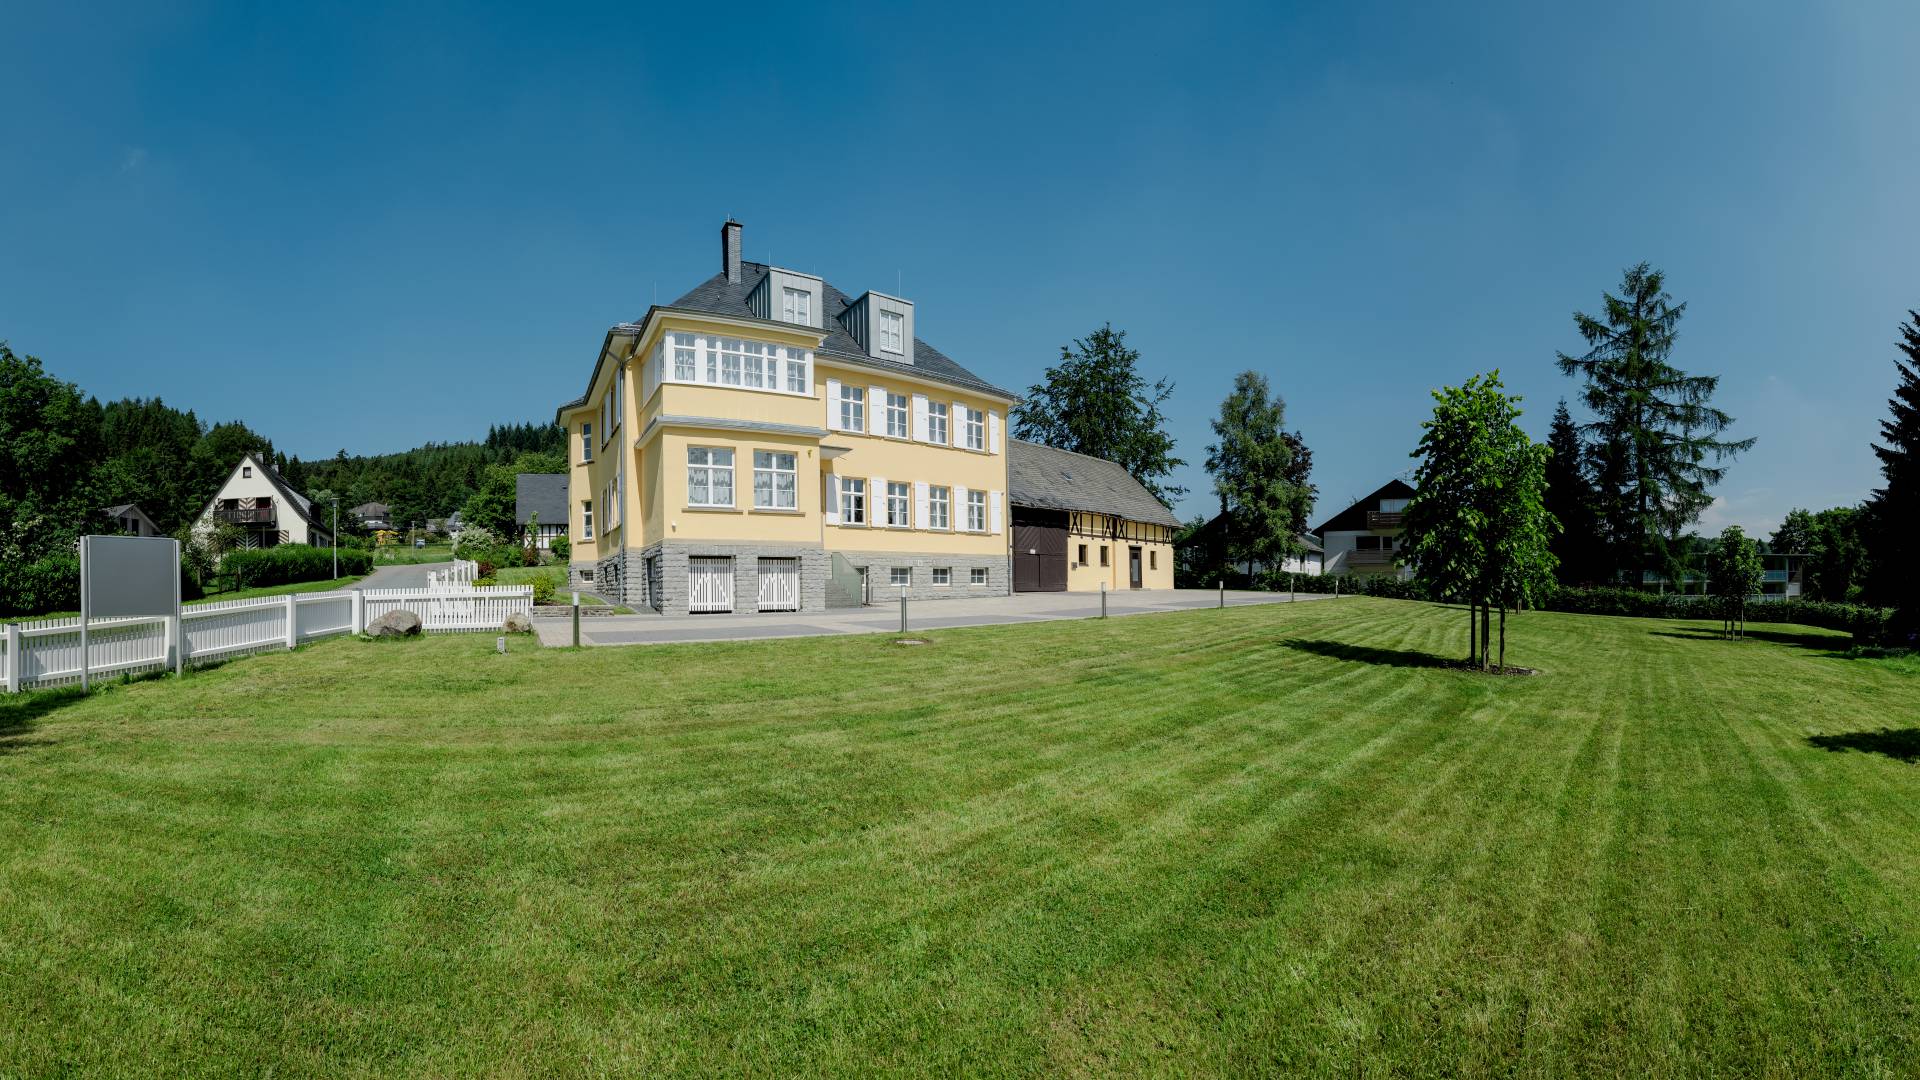 Stay overnight in the Residence Itterbach: After family celebrations or corporate events you enjoy the highest exclusivity and privacy in the suites of the residence Itterbach.